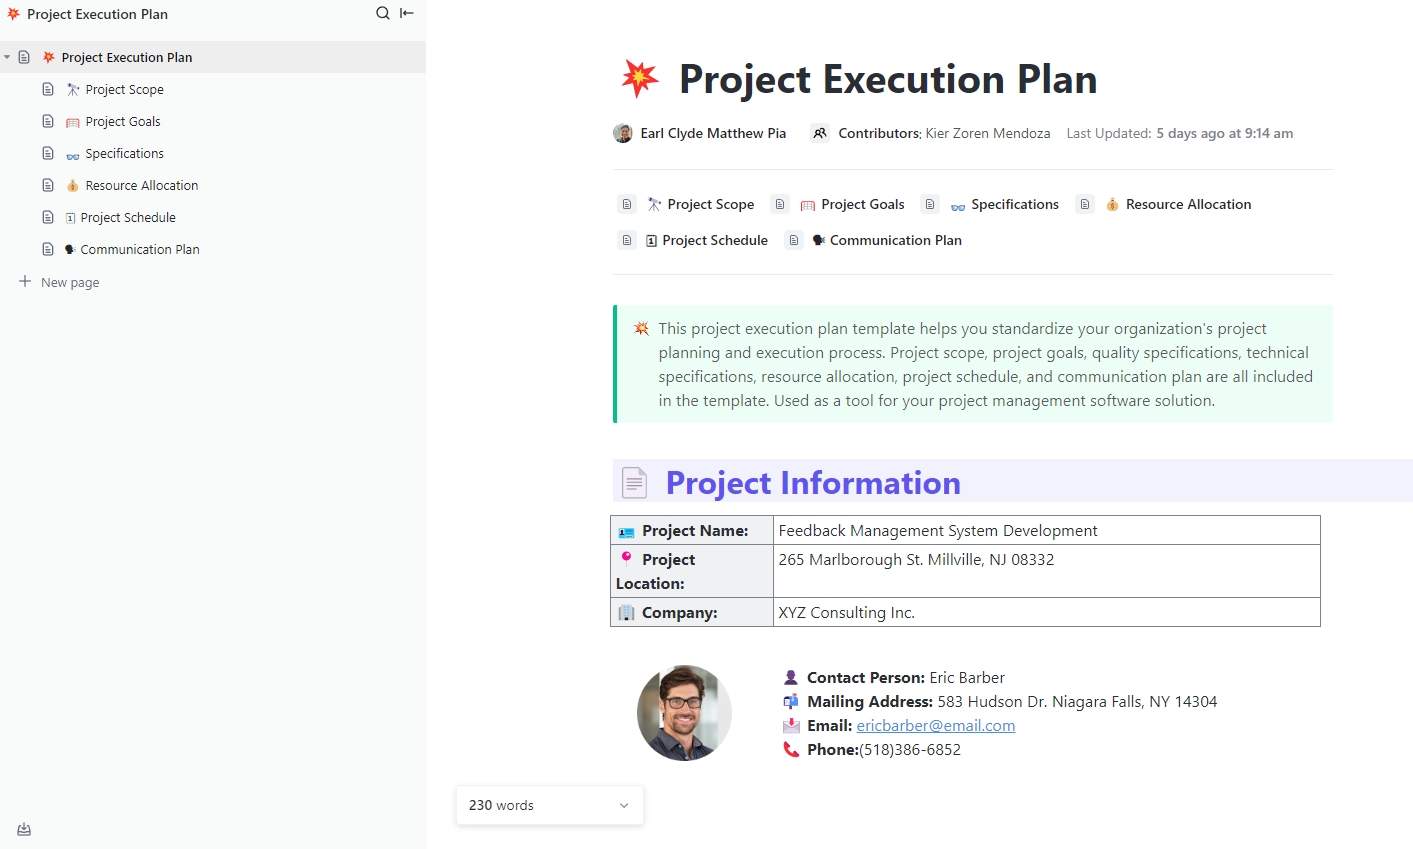 This project execution plan template helps you standardize your organization's project planning and execution process. Project scope, project goals, quality specifications, technical specifications, resource allocation, project schedule, and communication plan are all included in the template. Used as a tool for your project management software solution.